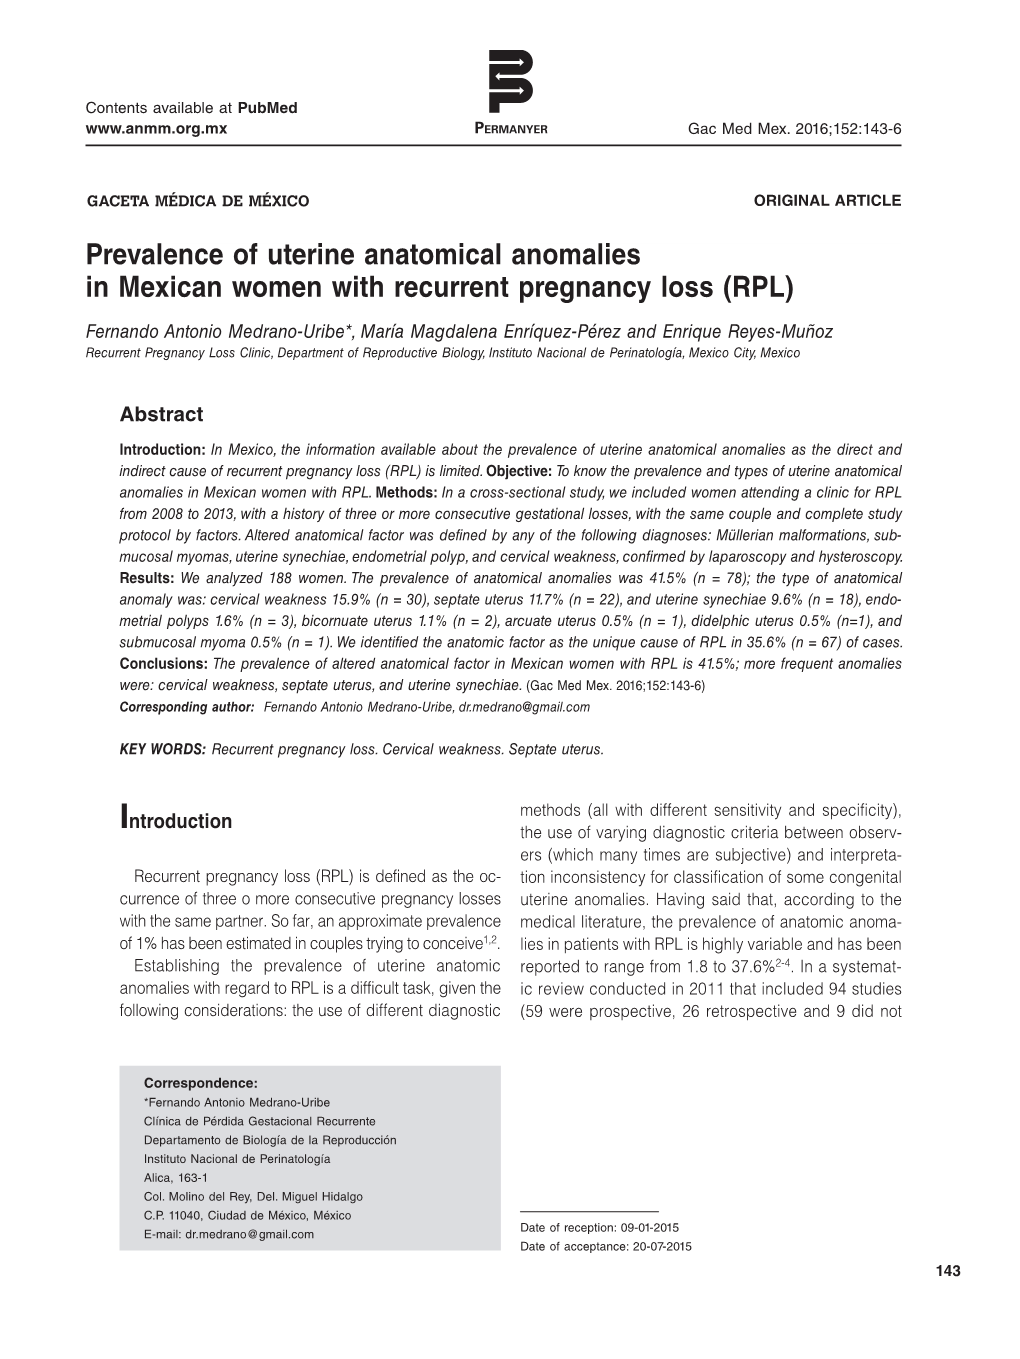 Prevalence of Uterine Anatomical Anomalies in Mexican Women with Recurrent Pregnancy Loss (RPL)